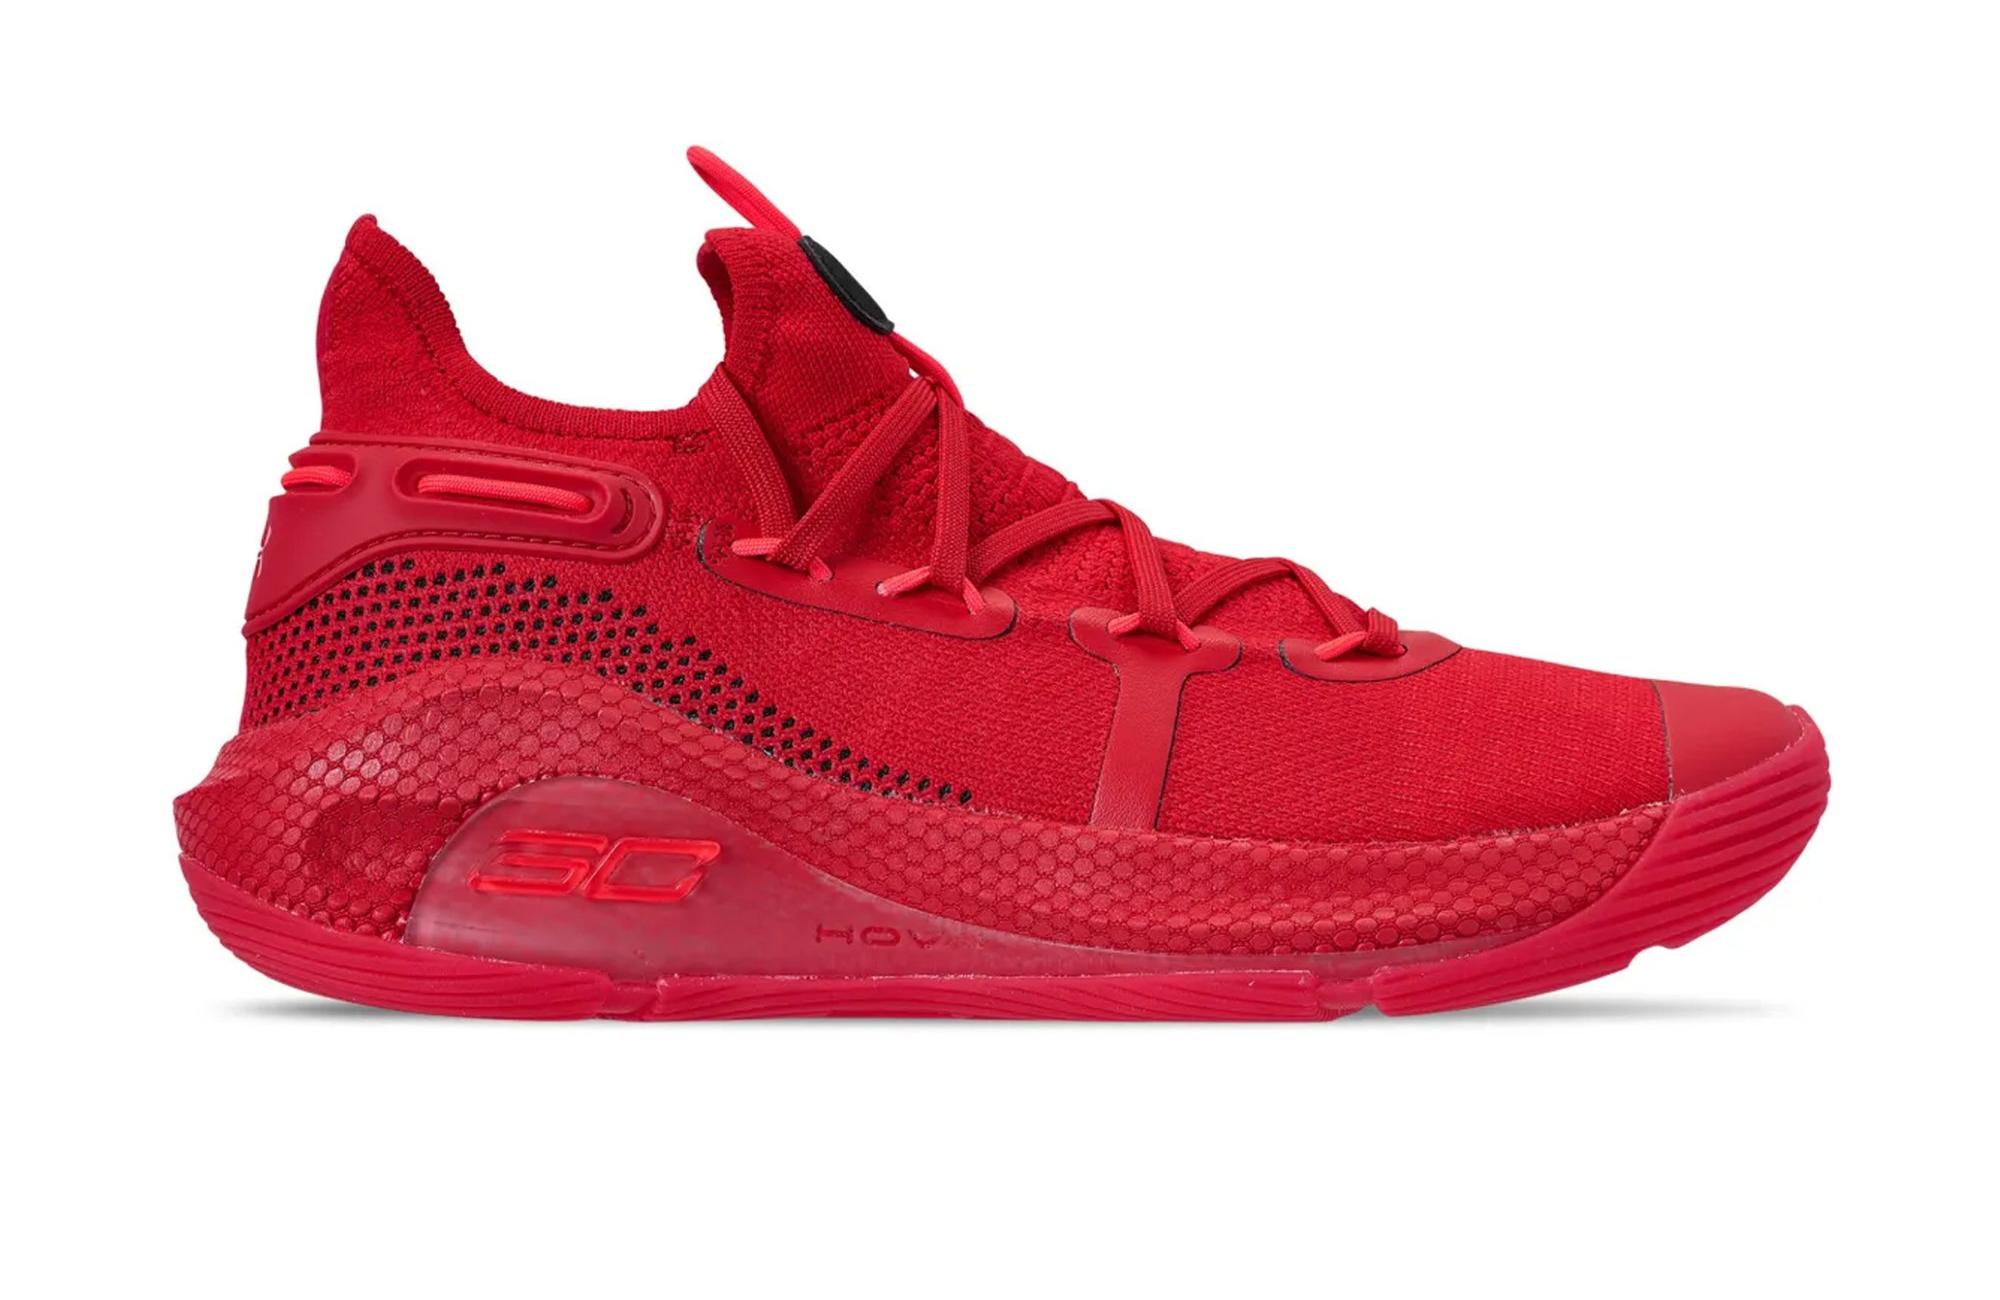 Sneakers Release – Under Armour Curry 6 “Red” Basketball Shoe